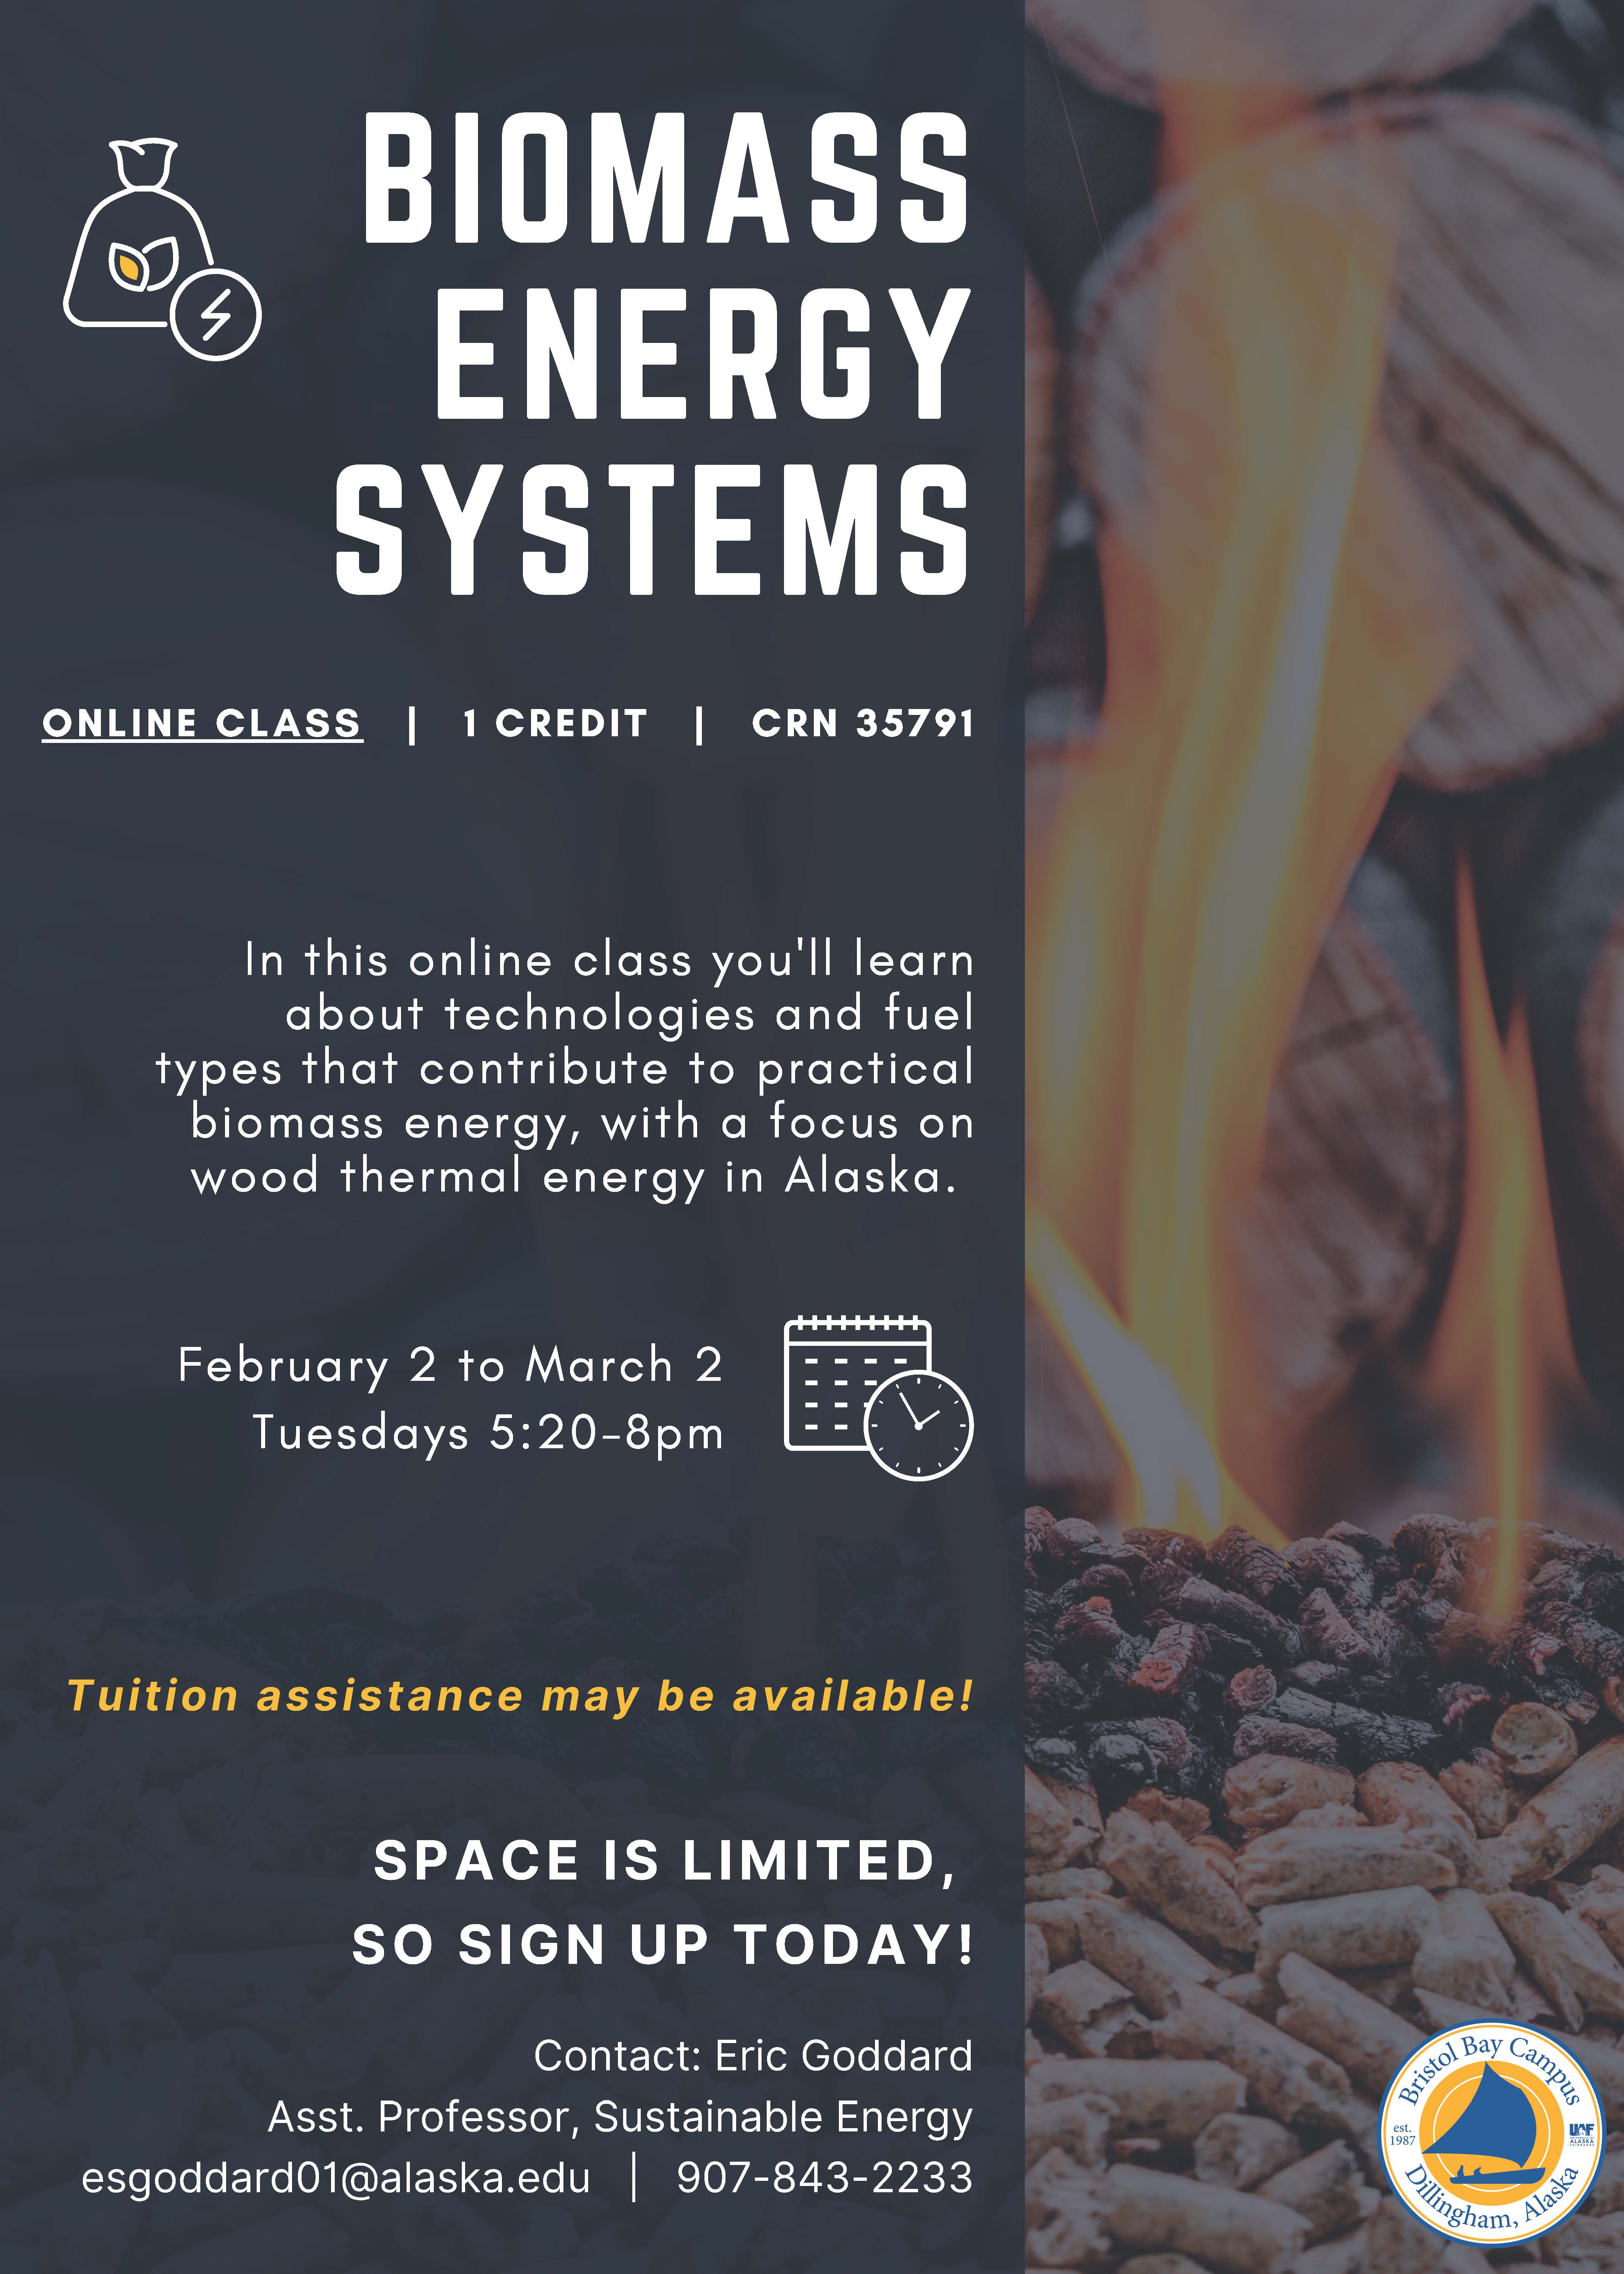 Register Now for Biomass Energy Systems Course